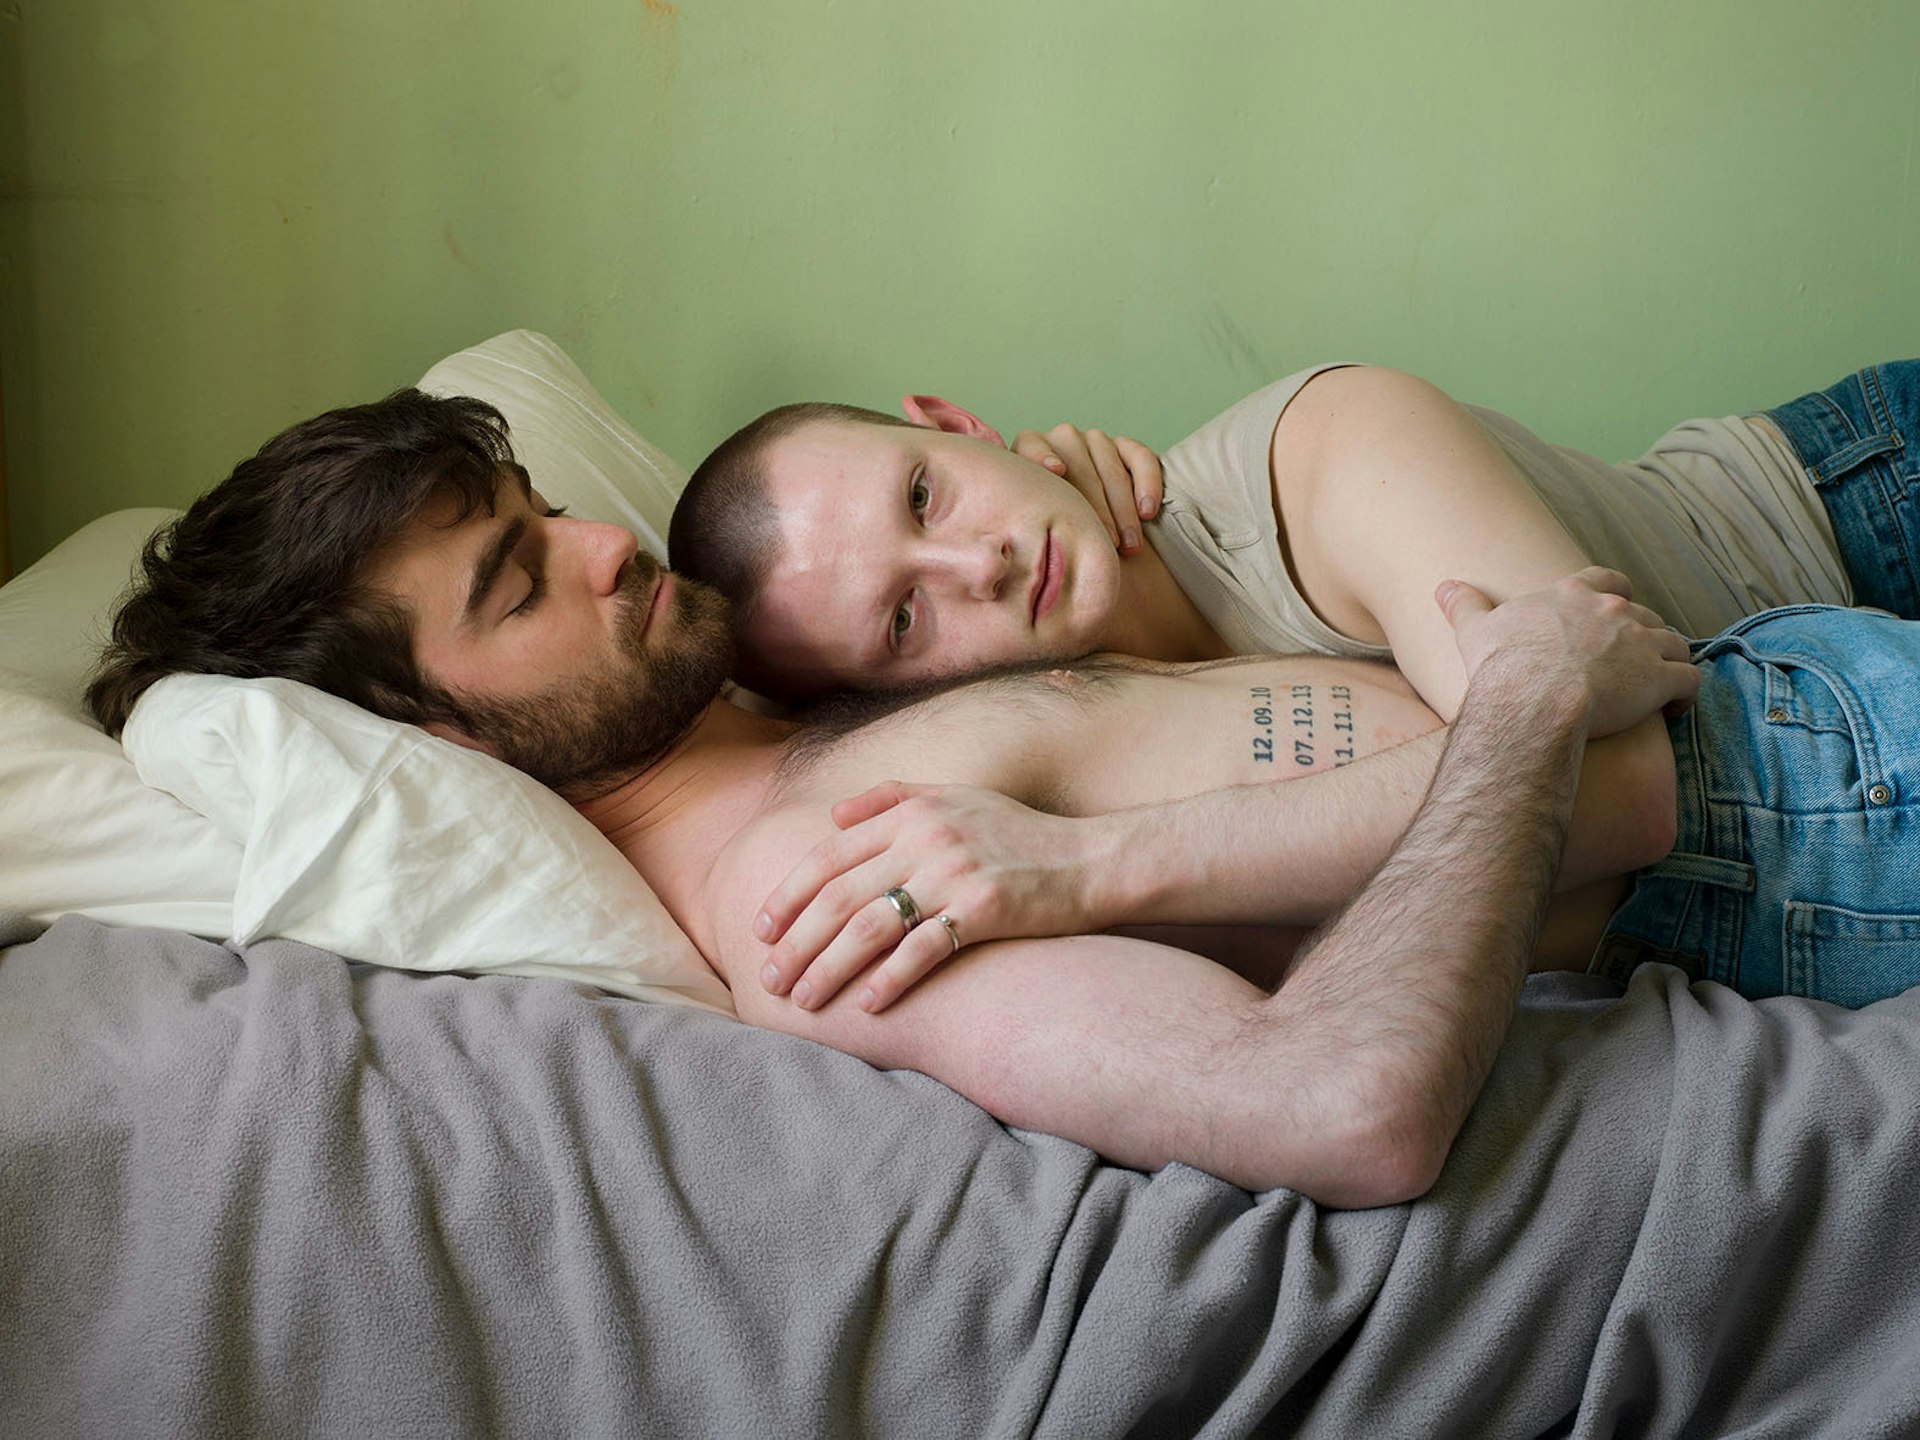 Portraits celebrating queer love and connection